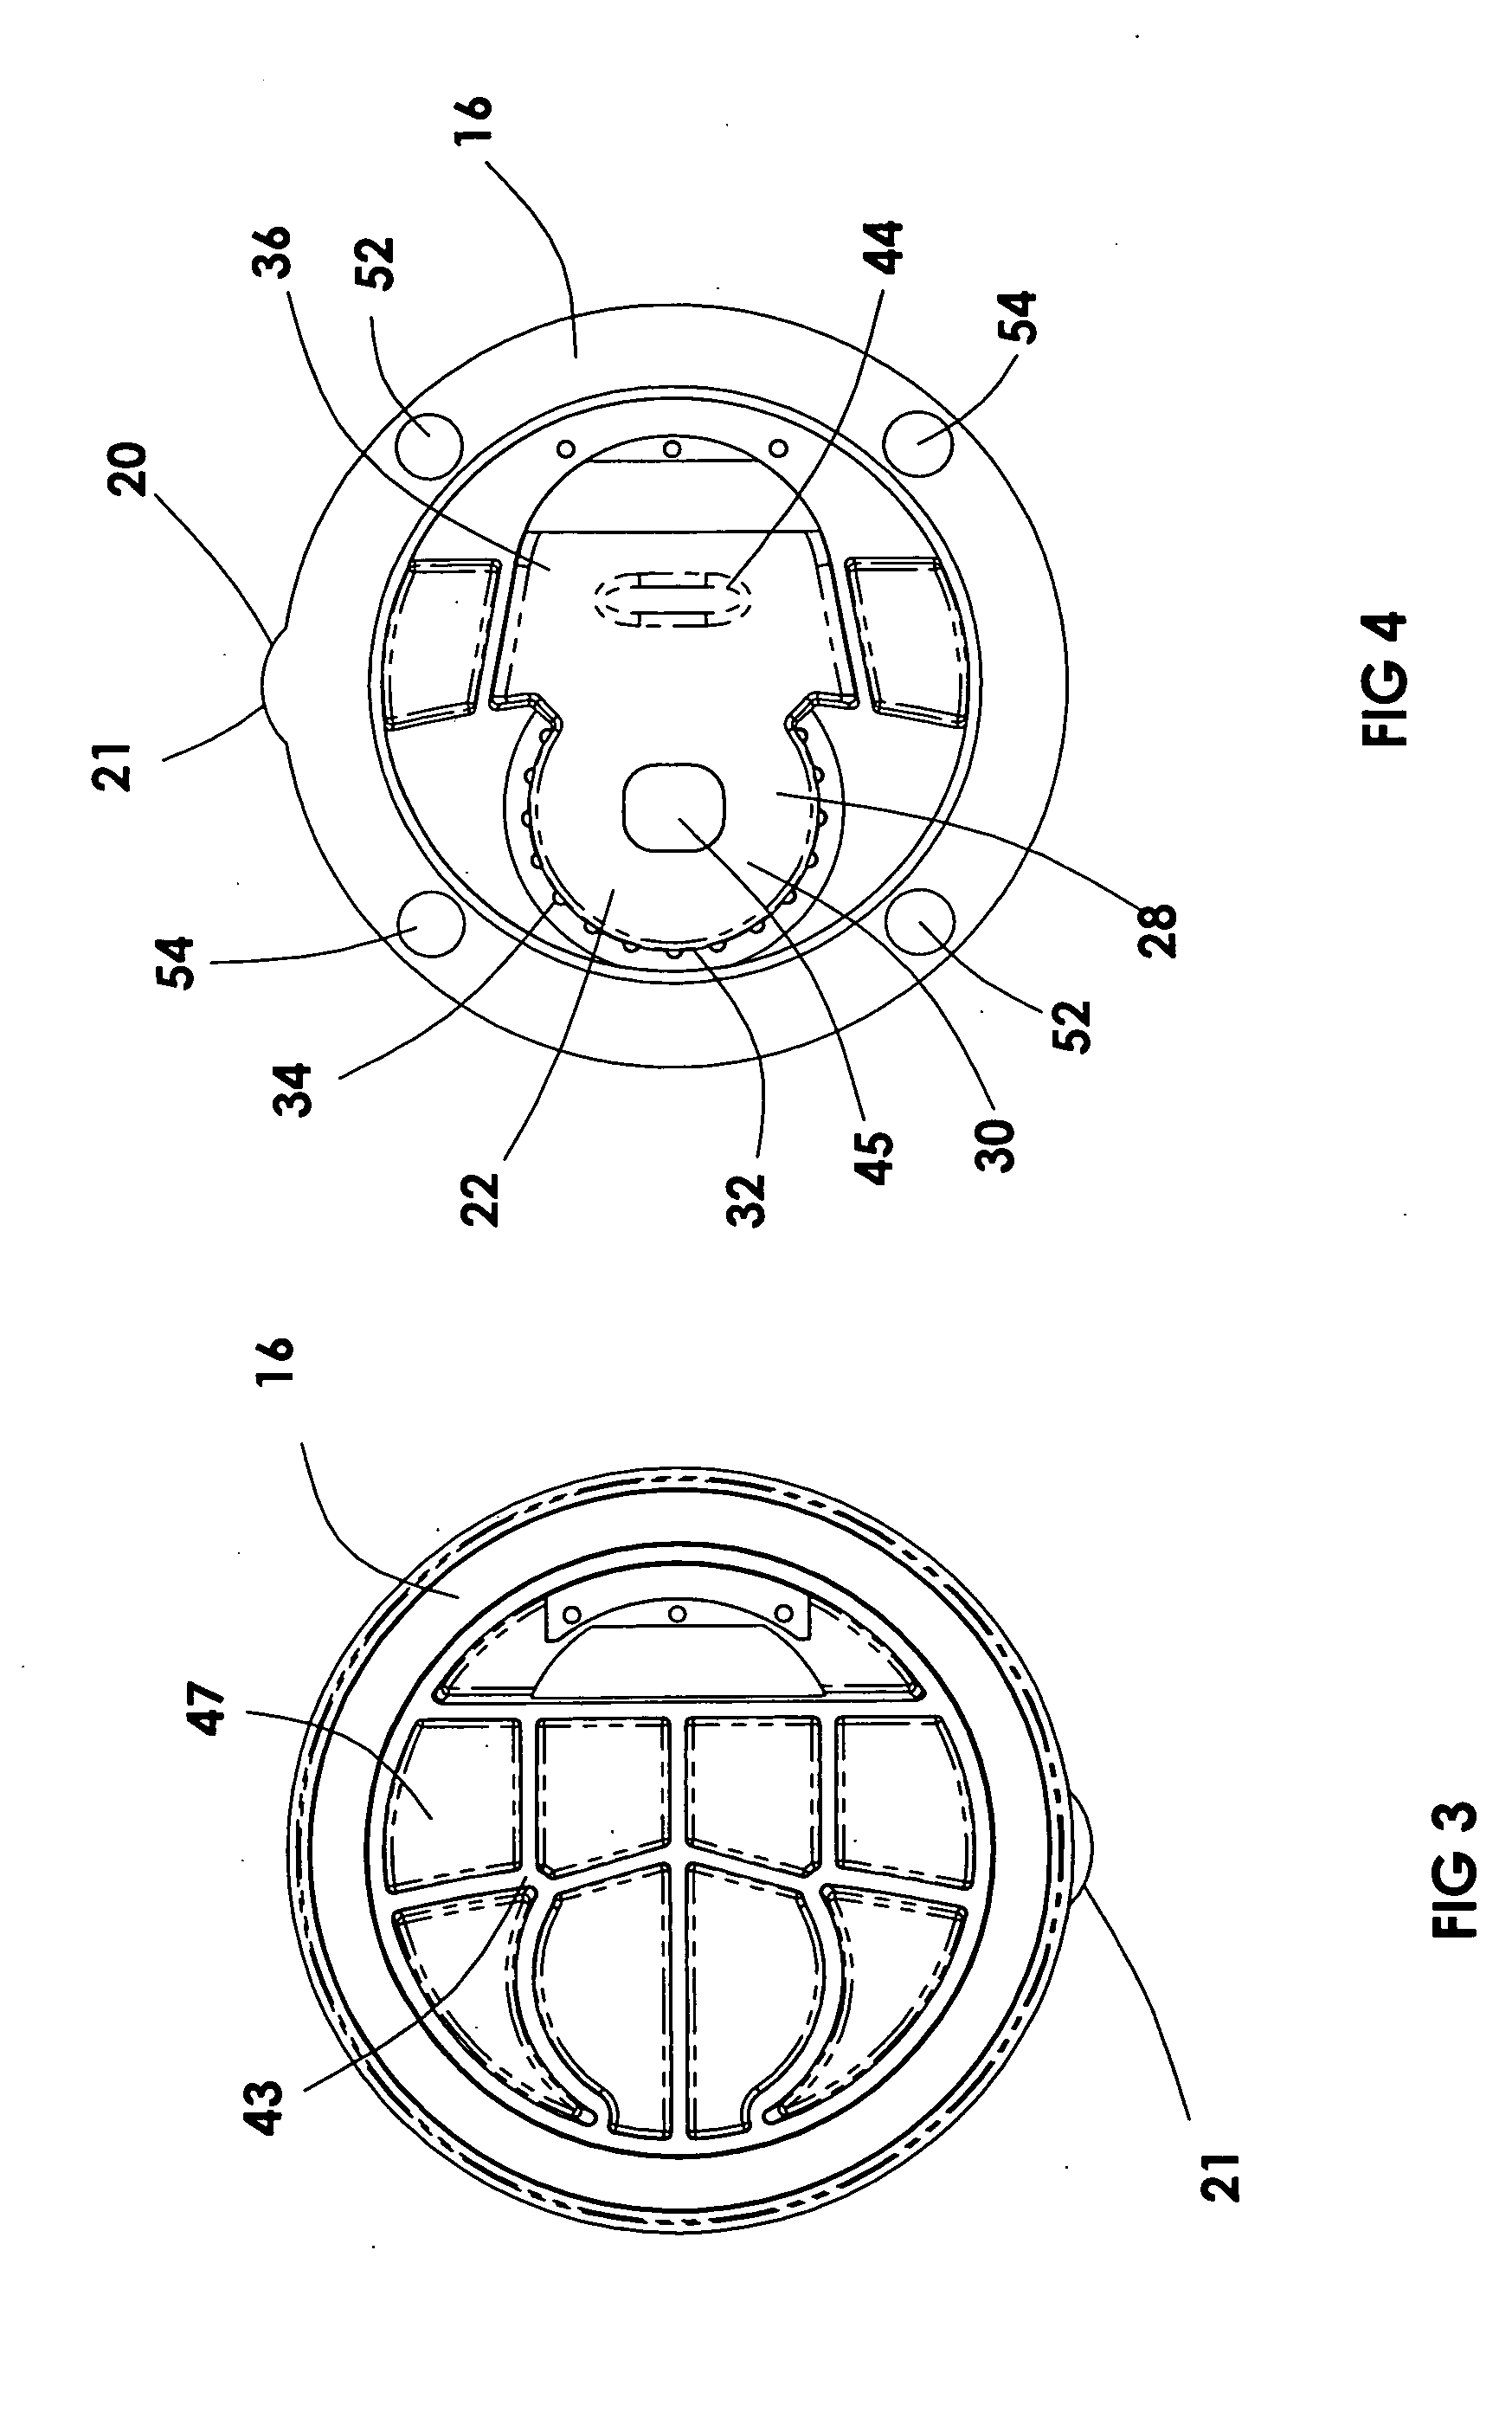 Temperature insulated beverage container receptacle and opening apparatus